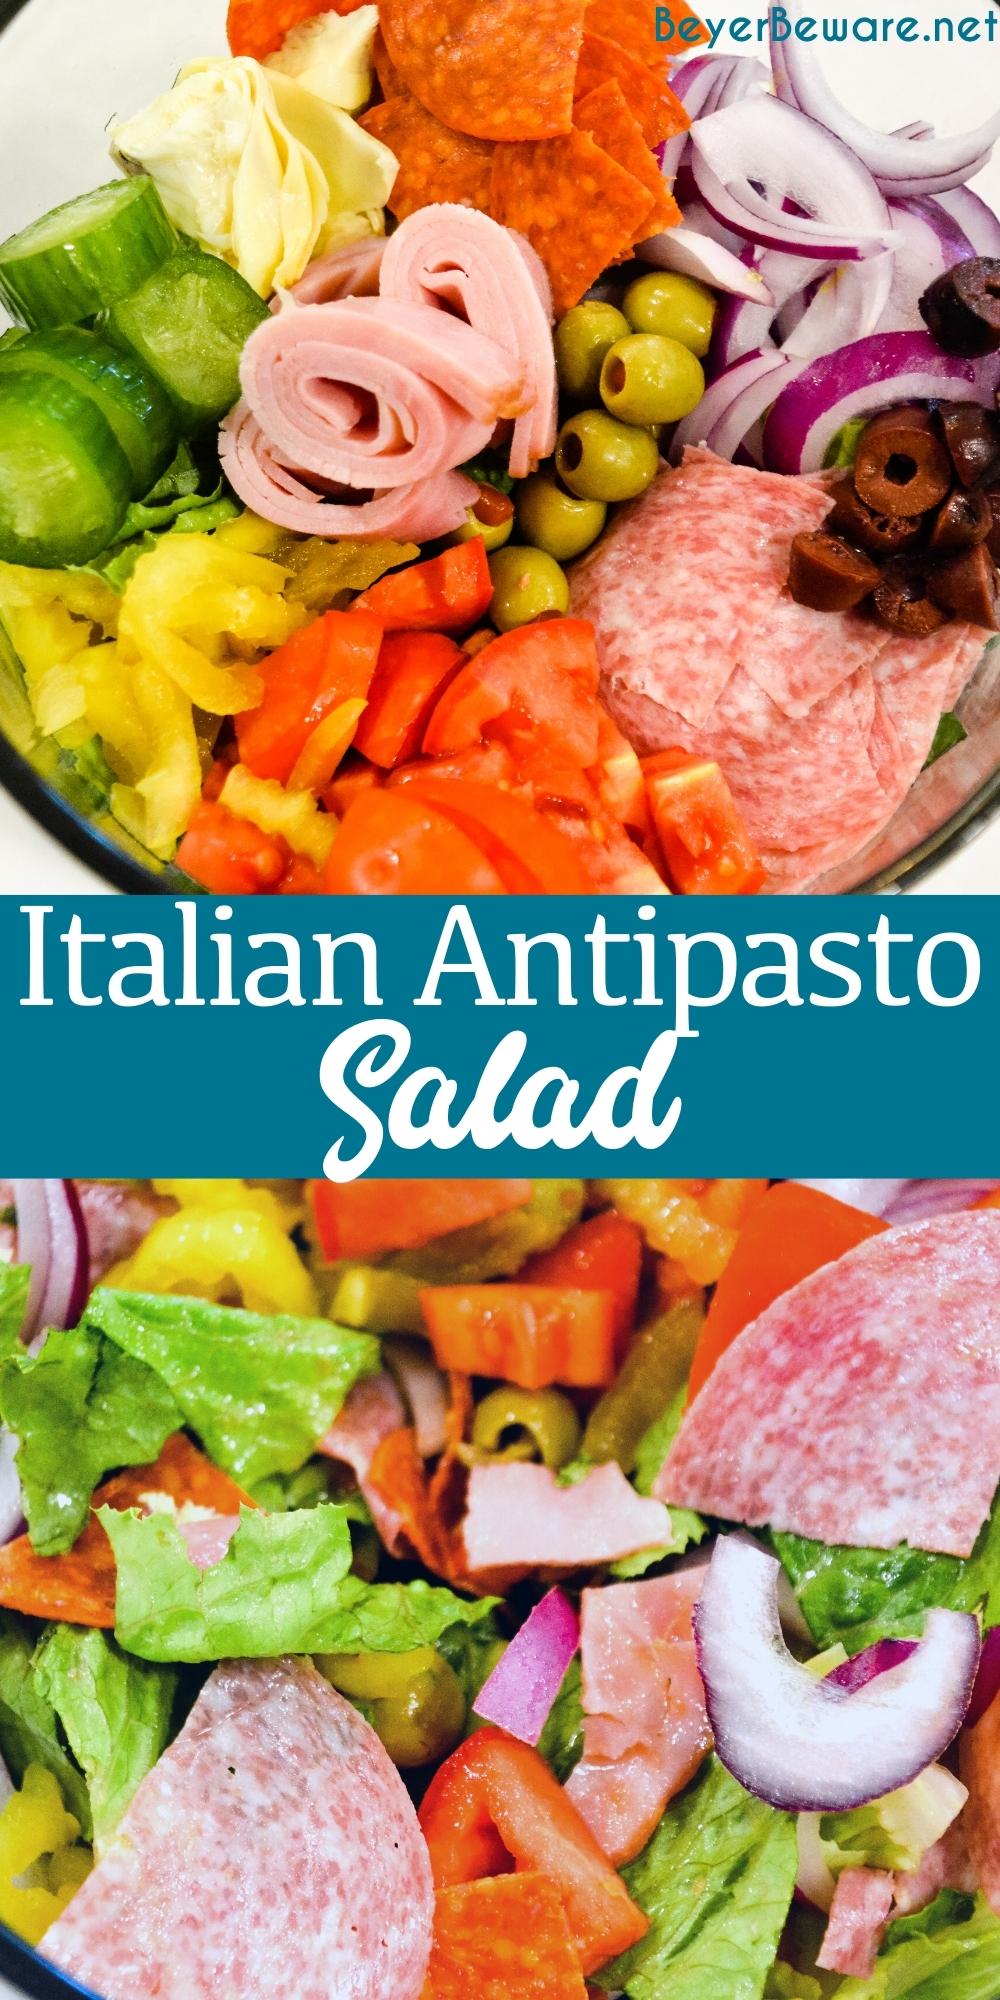 Italian antipasto salad is a hearty dinner salad with a romaine lettuce base and filled up with salami, pepperoni, tomatoes, cucumbers, onions, olives, banana peppers, artichoke hearts and cheese dressed with a homemade Italian dressing.